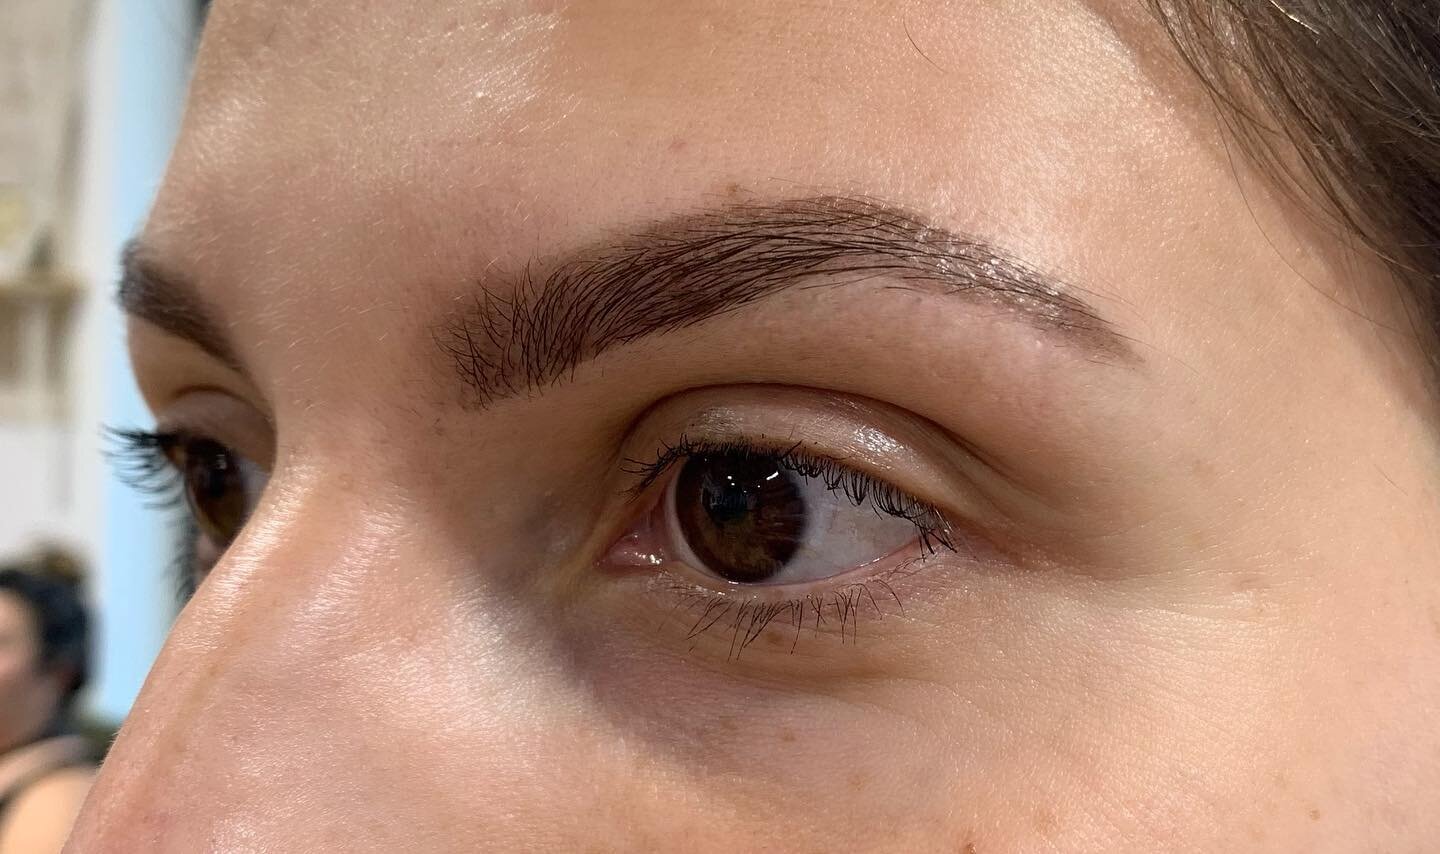 If you&rsquo;re someone who fills in your brows everyday then brow staining is for you! The stain on the skin lasts up to 10 days and 6 weeks on brow hairs depending on your skincare routine, skin type, and sun exposure. Give us a call at (720)-605-1